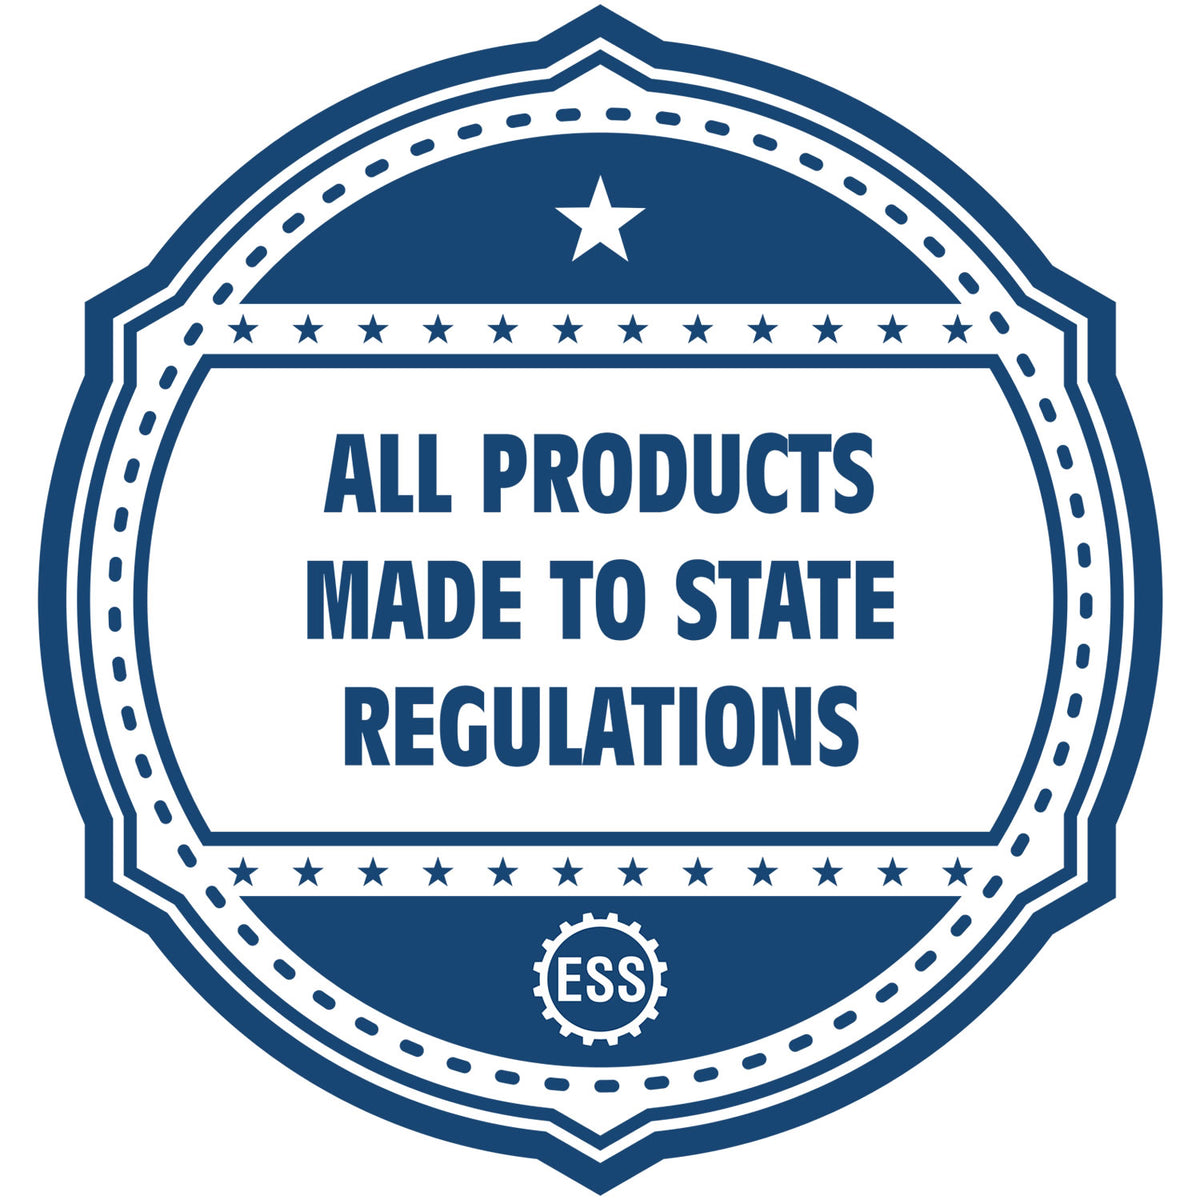 A blue icon or badge for the Hybrid West Virginia Architect Seal showing that this product is made in compliance with state regulations.